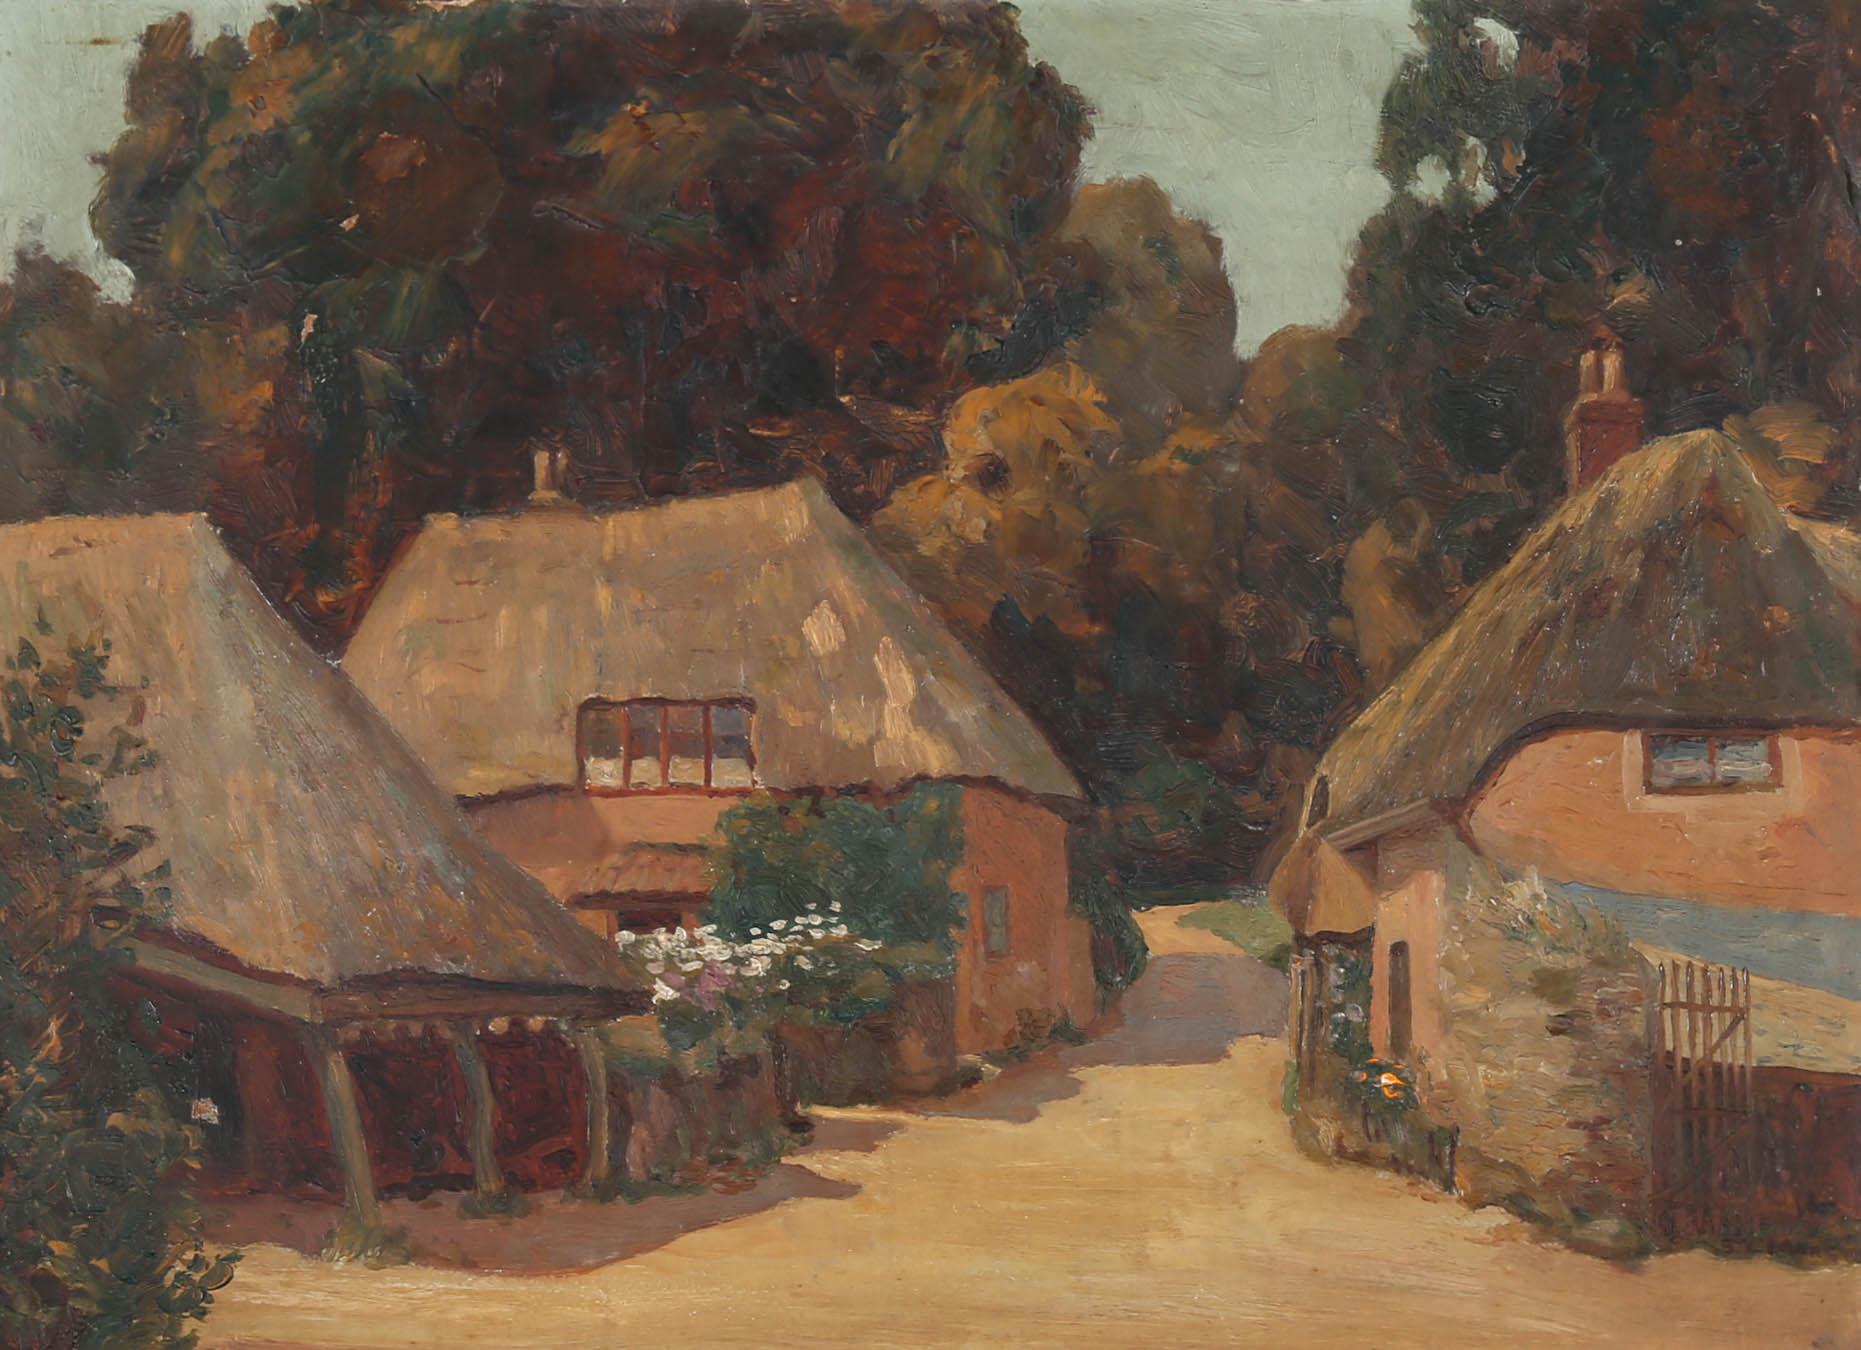 This charming scene by landscape painter Reginald St. Clair Marston (1886-1943), depicts Cockington Lane and forge near Torquay, Devon. Dating back over 300 years these particular thatched cottages are some of the most photographed buildings in